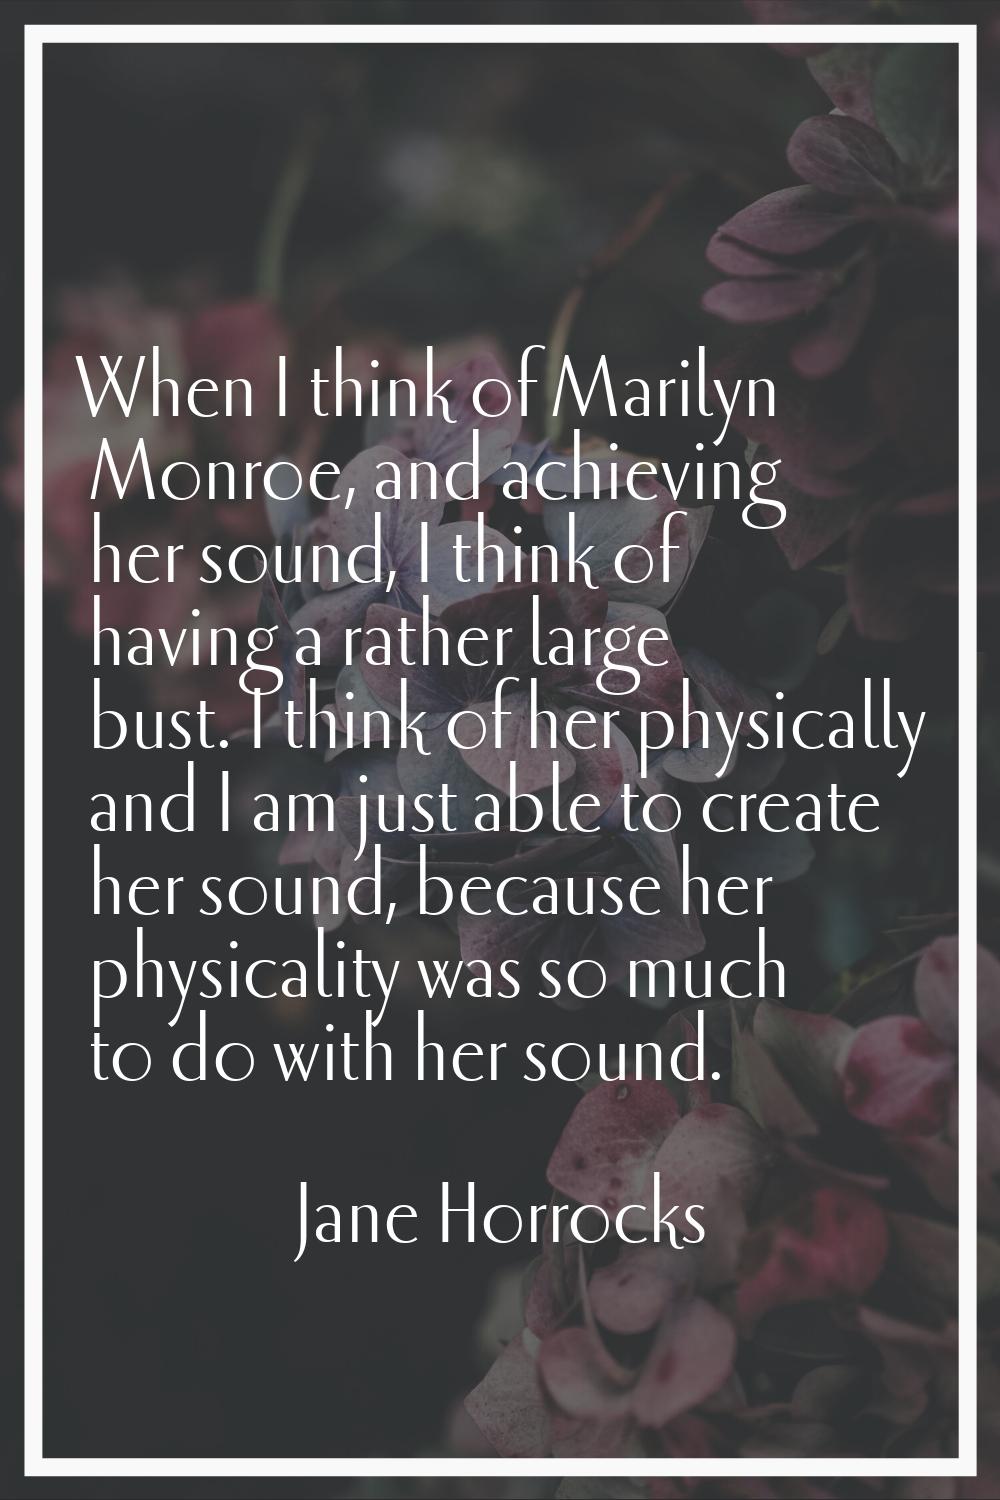 When I think of Marilyn Monroe, and achieving her sound, I think of having a rather large bust. I t